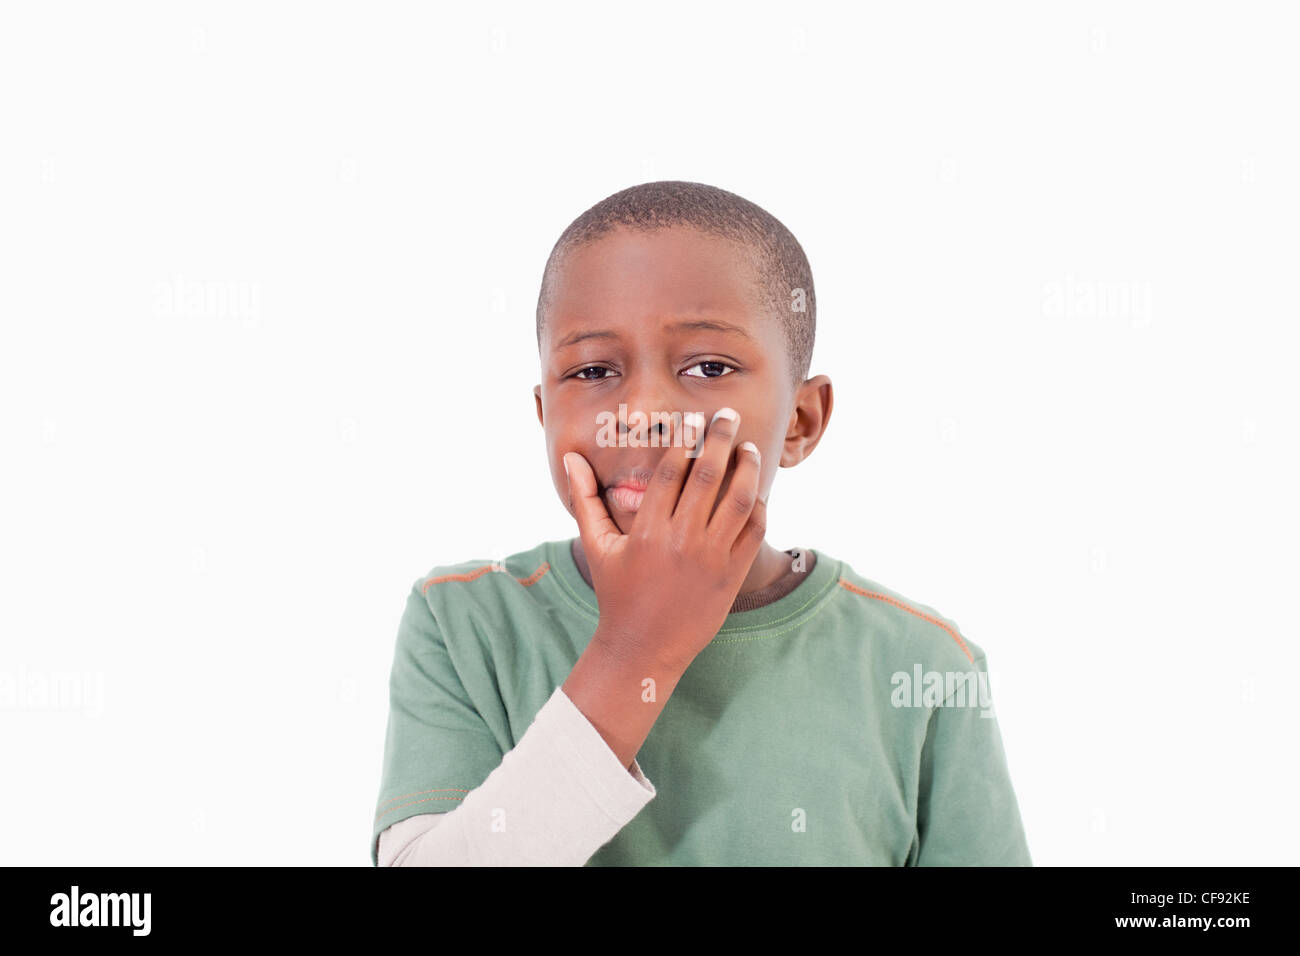 Thoughtful young boy Stock Photo